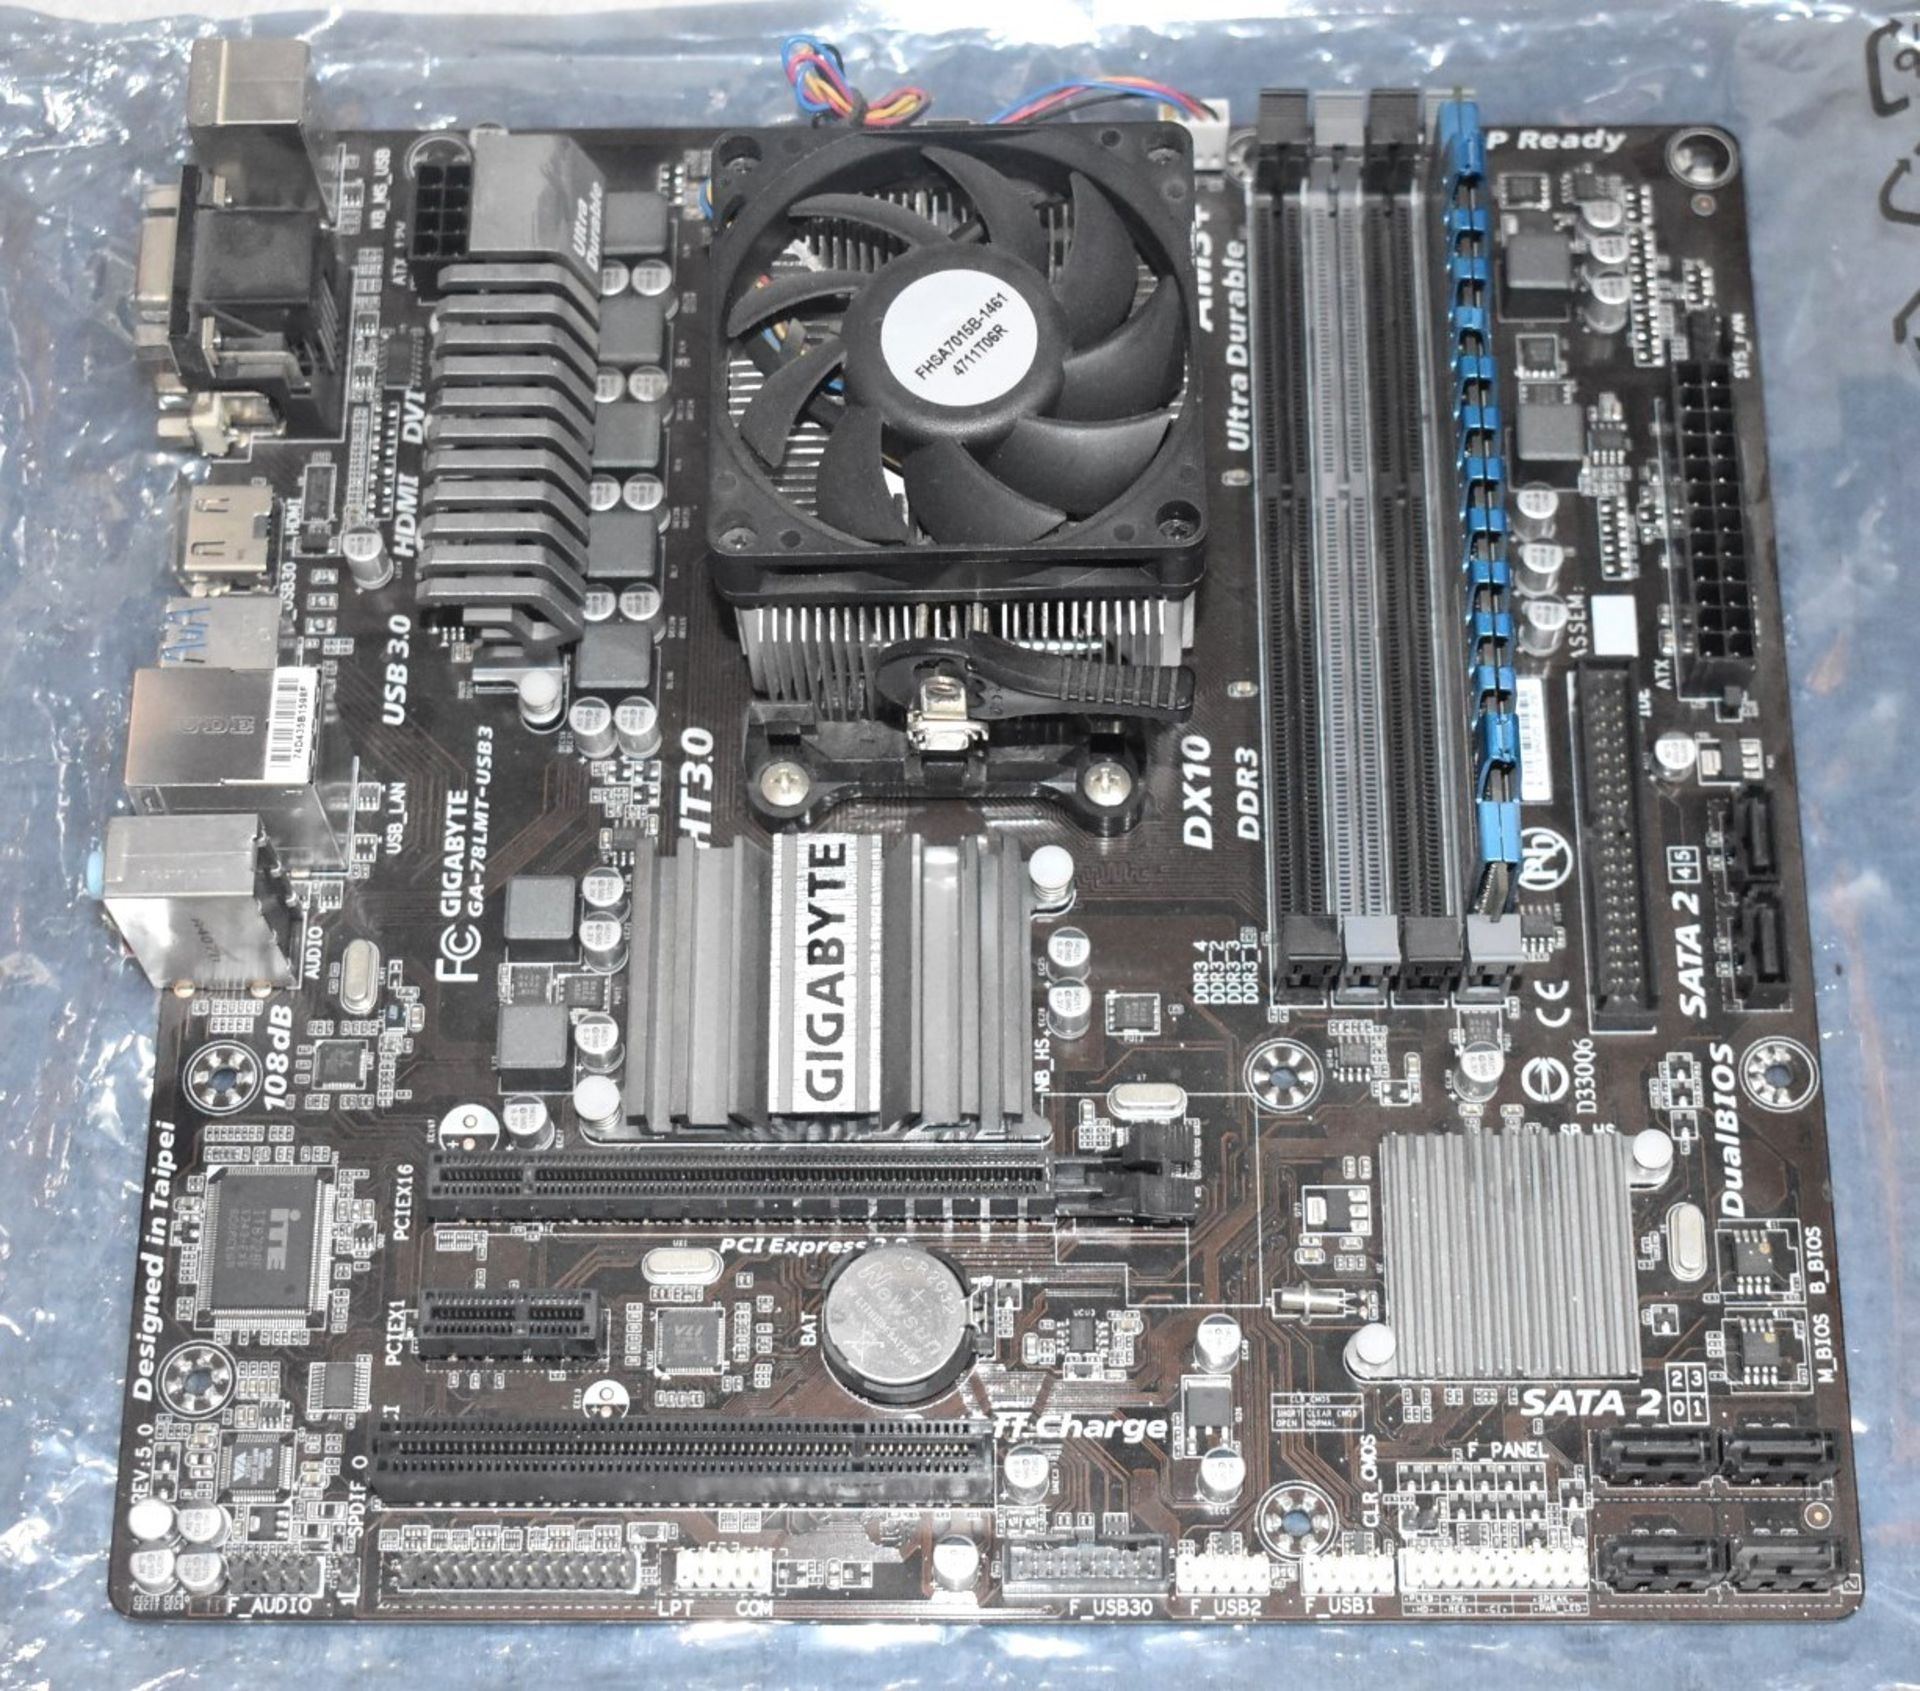 1 x Gigabyte GA-78LMT-USB3 Motherboard With an AMD FX-8370 8 Core Processor and 4gb Ram